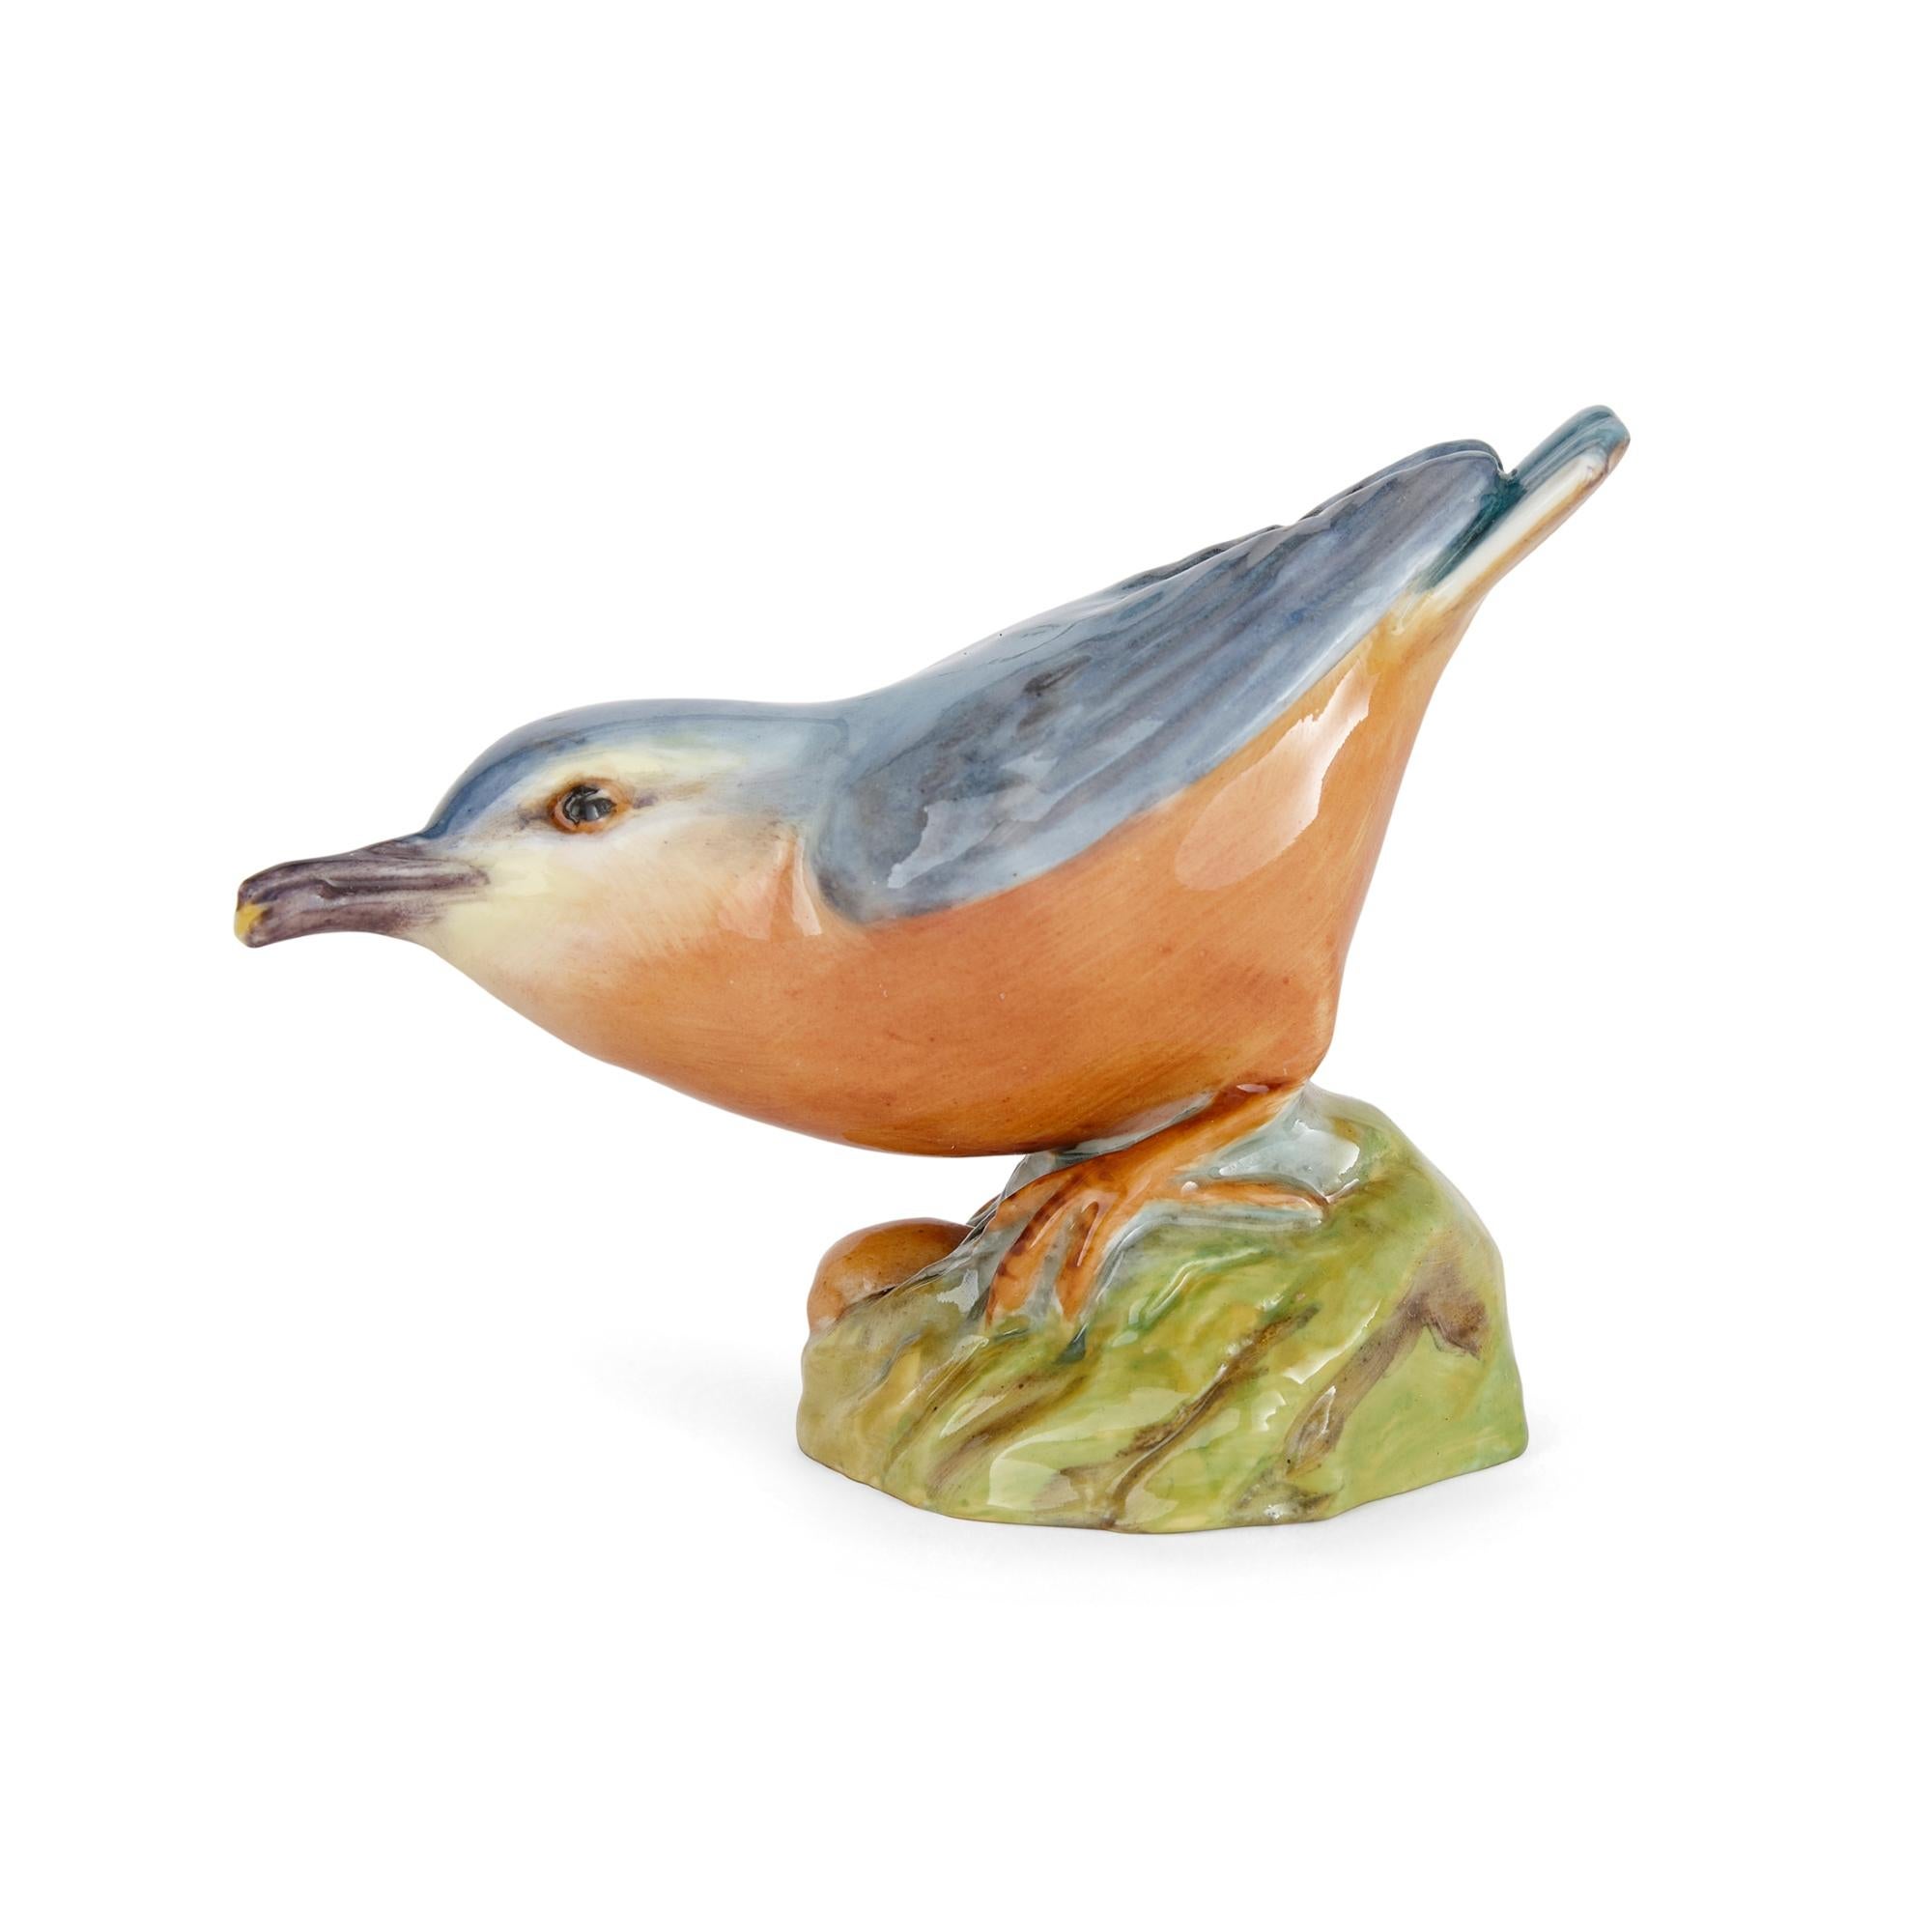 Set of five Royal Worcester bird models 
English, c. 1950
Largest: Height 9cm, width 8cm, depth 6cm
Smallest: Height 6cm, width 6cm, width 4cm

Designed by a woman and from the collection of a renowned antiques expert, this selection of five